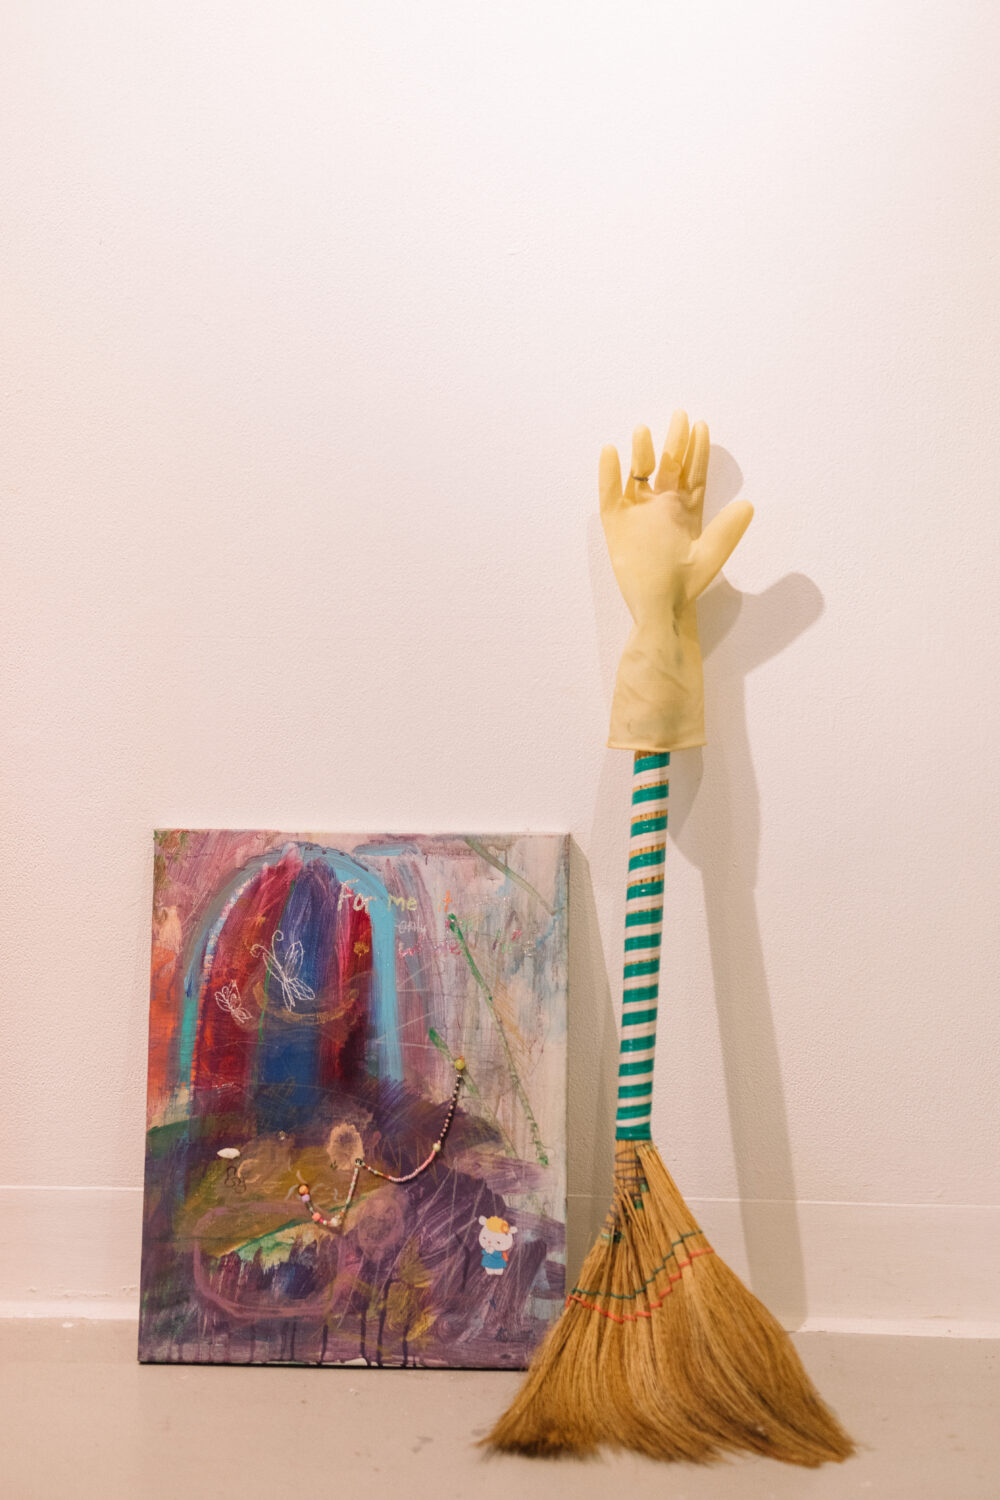 Sitting on the floor of the Nexus Gallery is a 60x40cm painting with abstract purple, red and blue forms, snippets of words, and strings of coloured beads. To the right of this painting is a slightly taller broom, its end capped with a yellow glove.